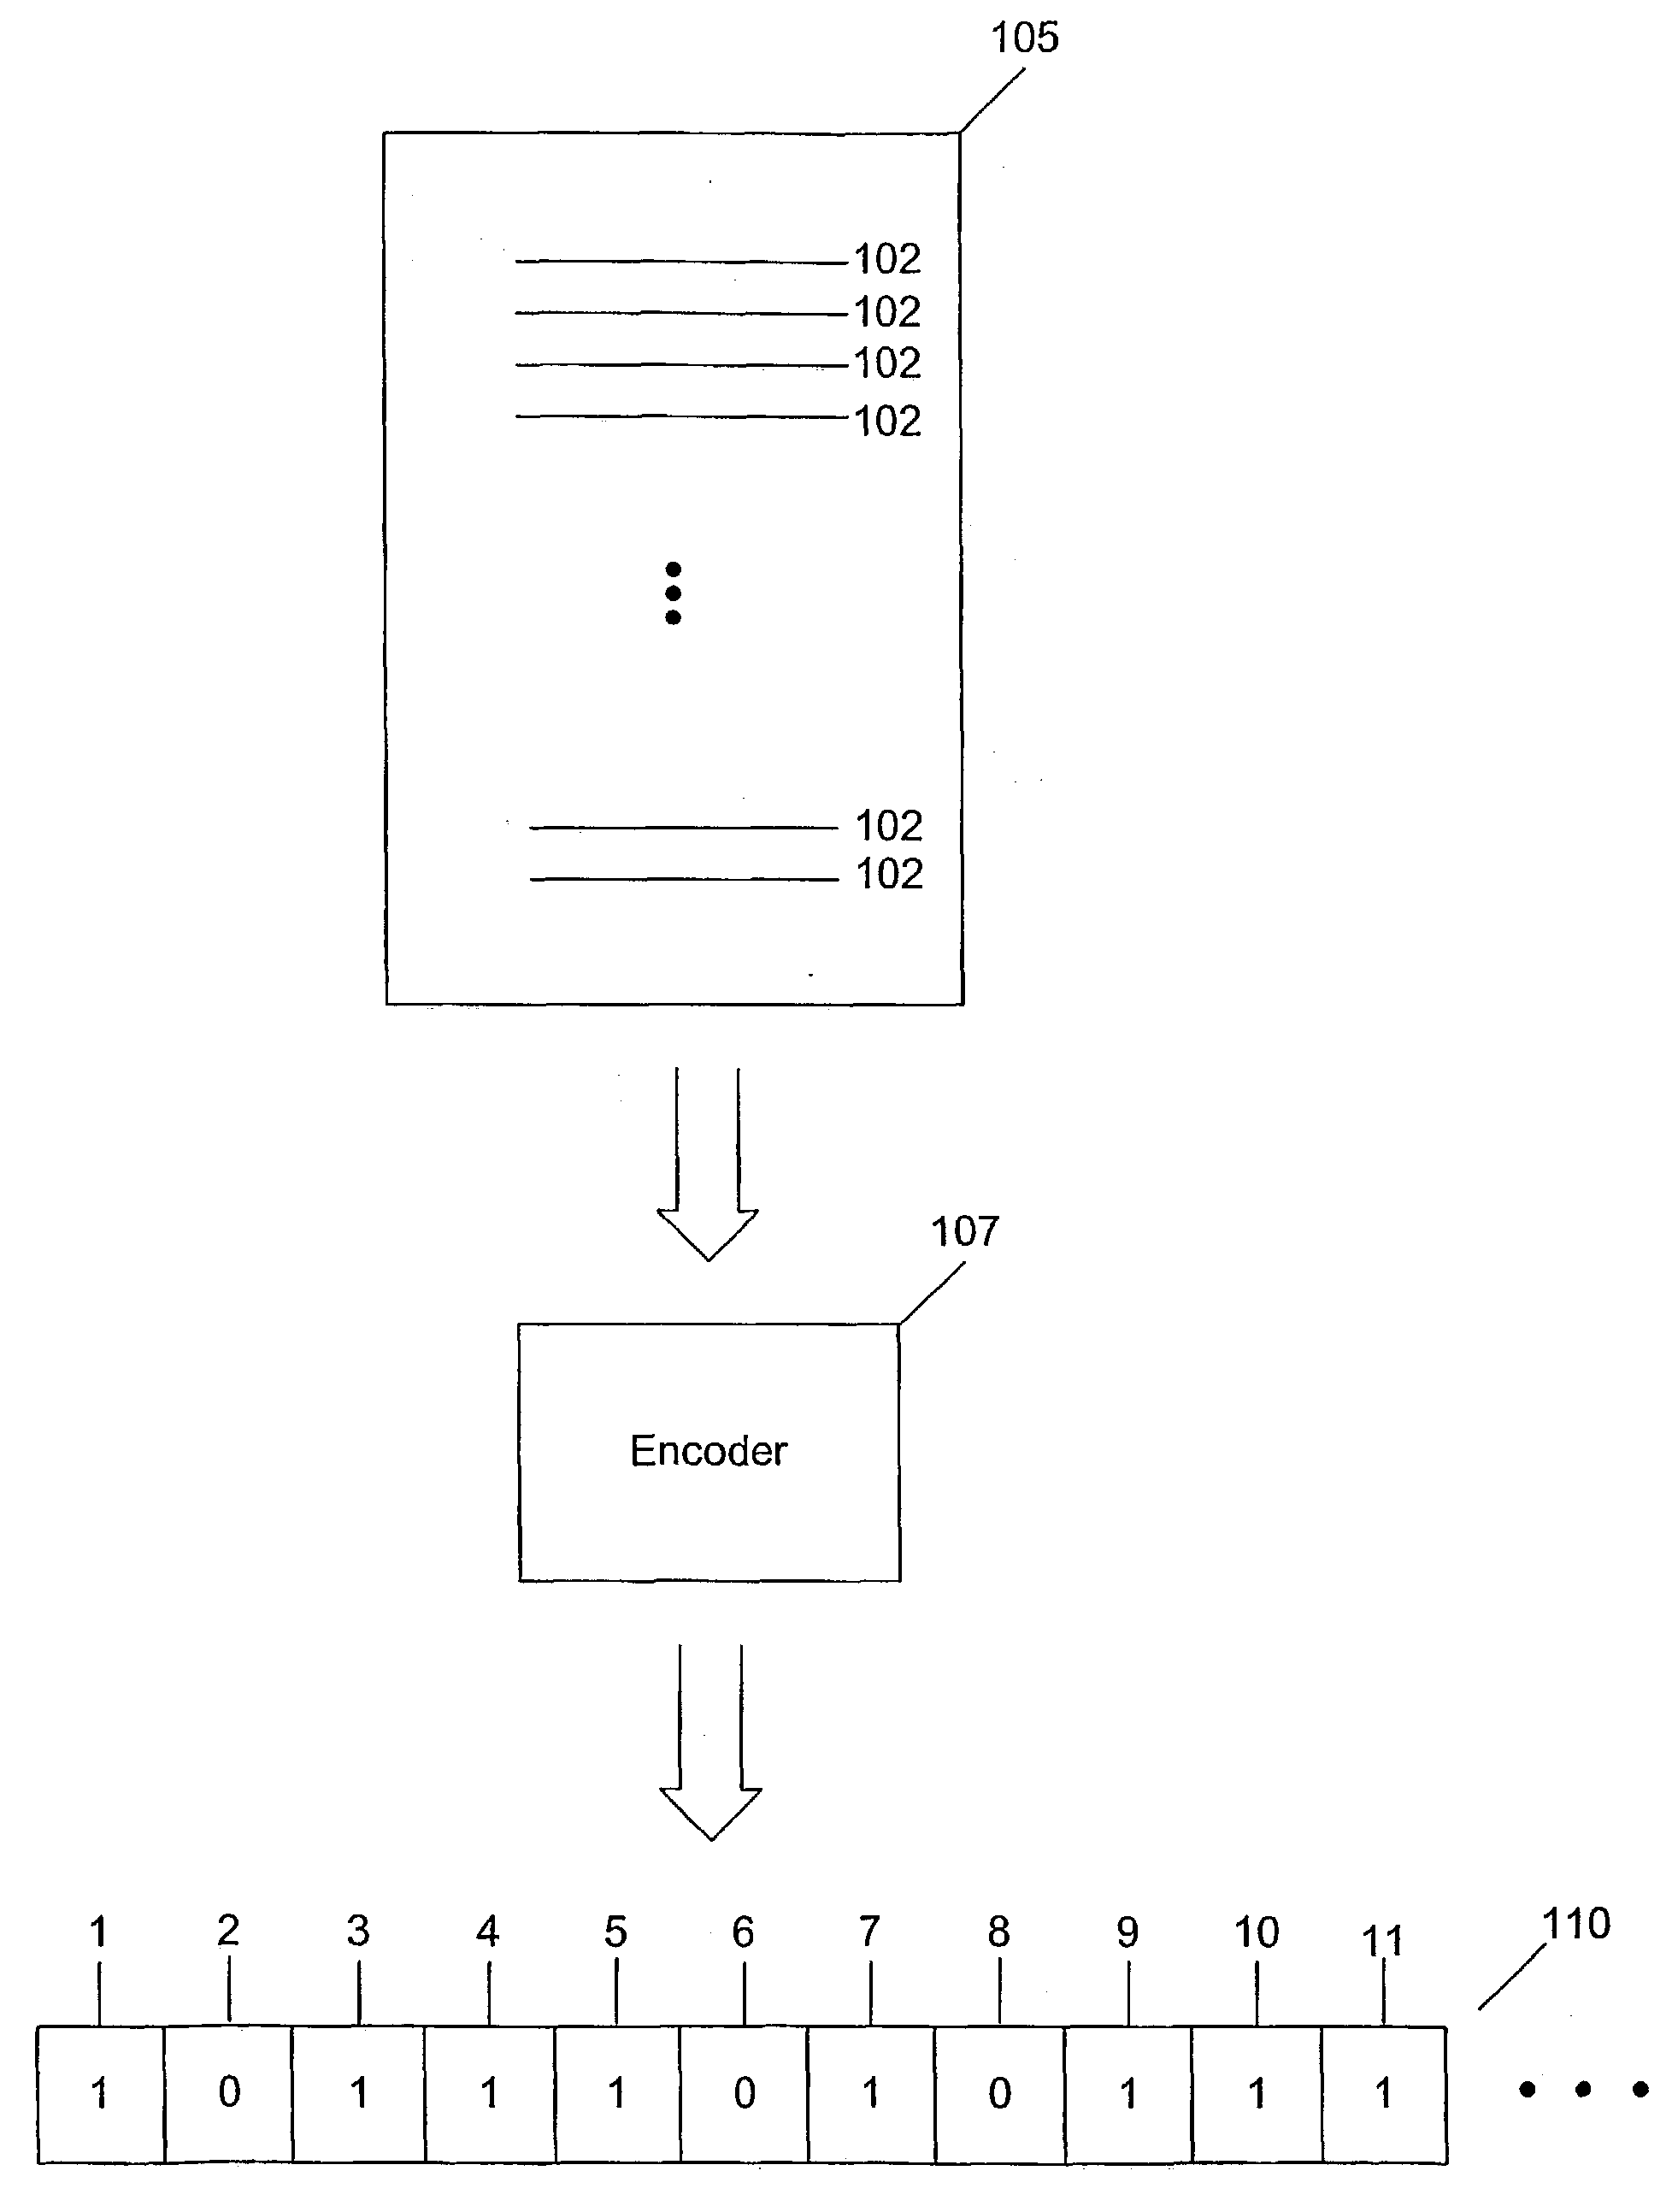 Delivery point validation system